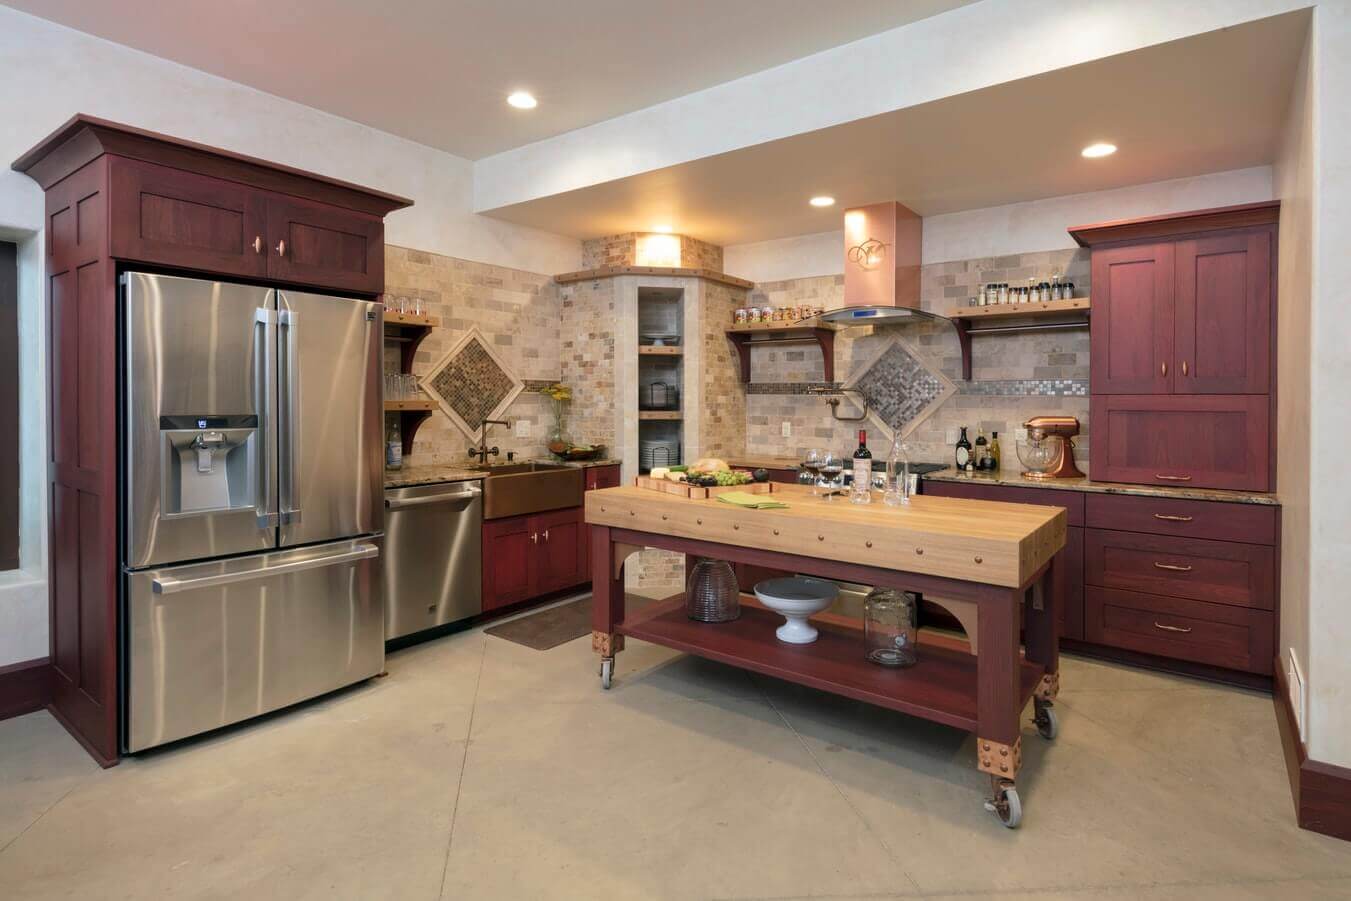 Kitchen with stone tile flooring and dark-red wooden cabinets